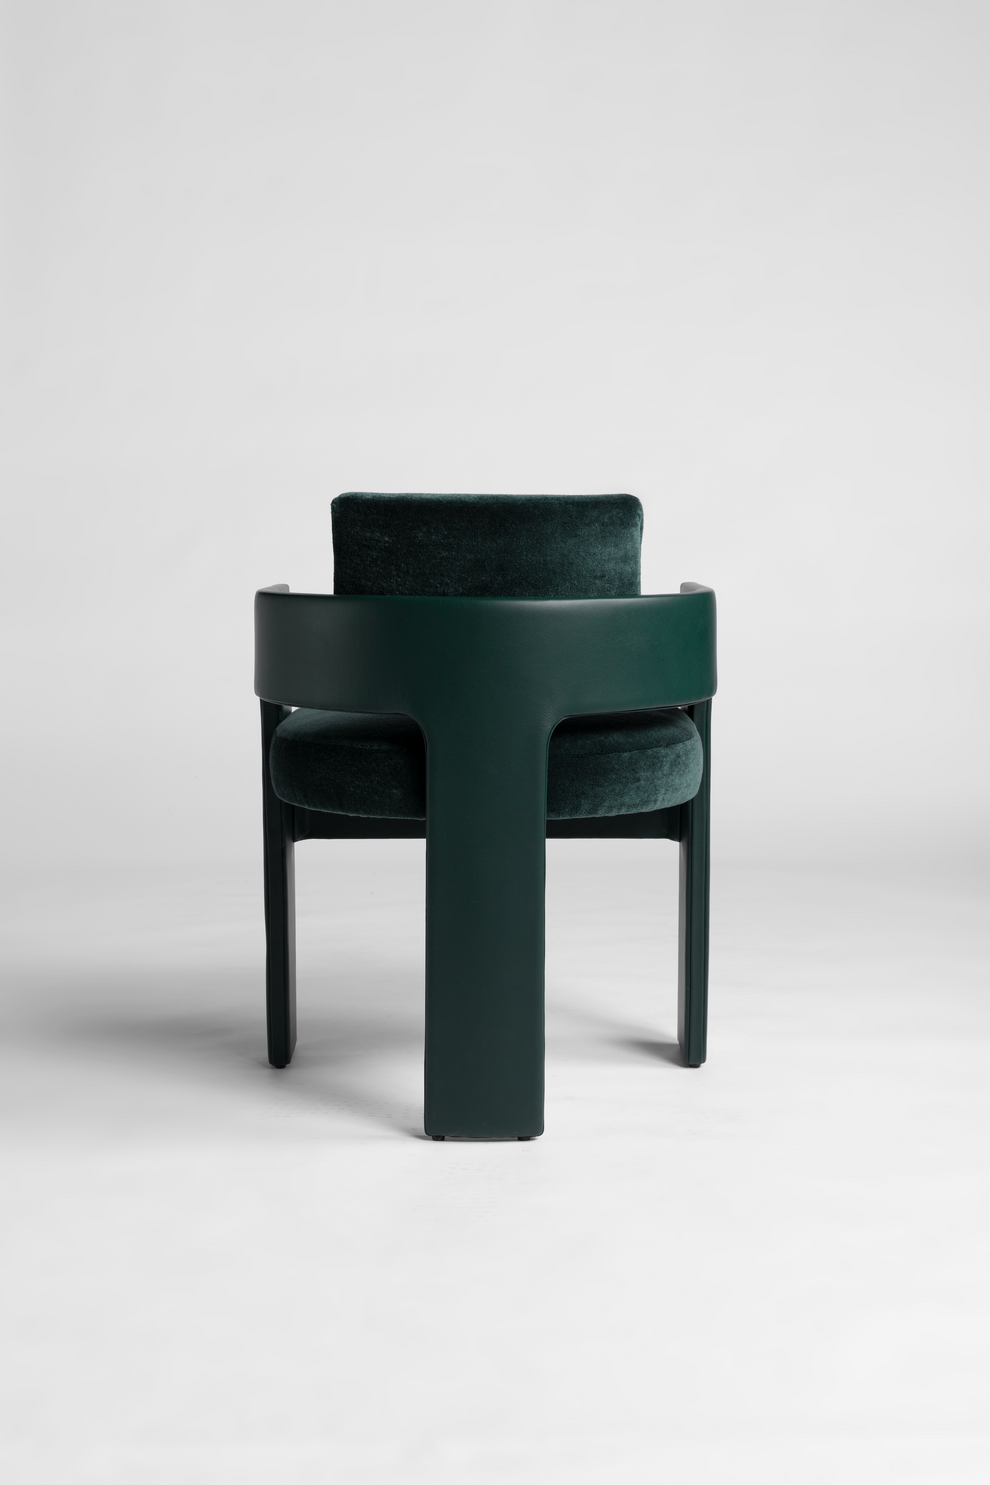 Shown in Pine Green Leather frame with Pine Green Mohair cushions